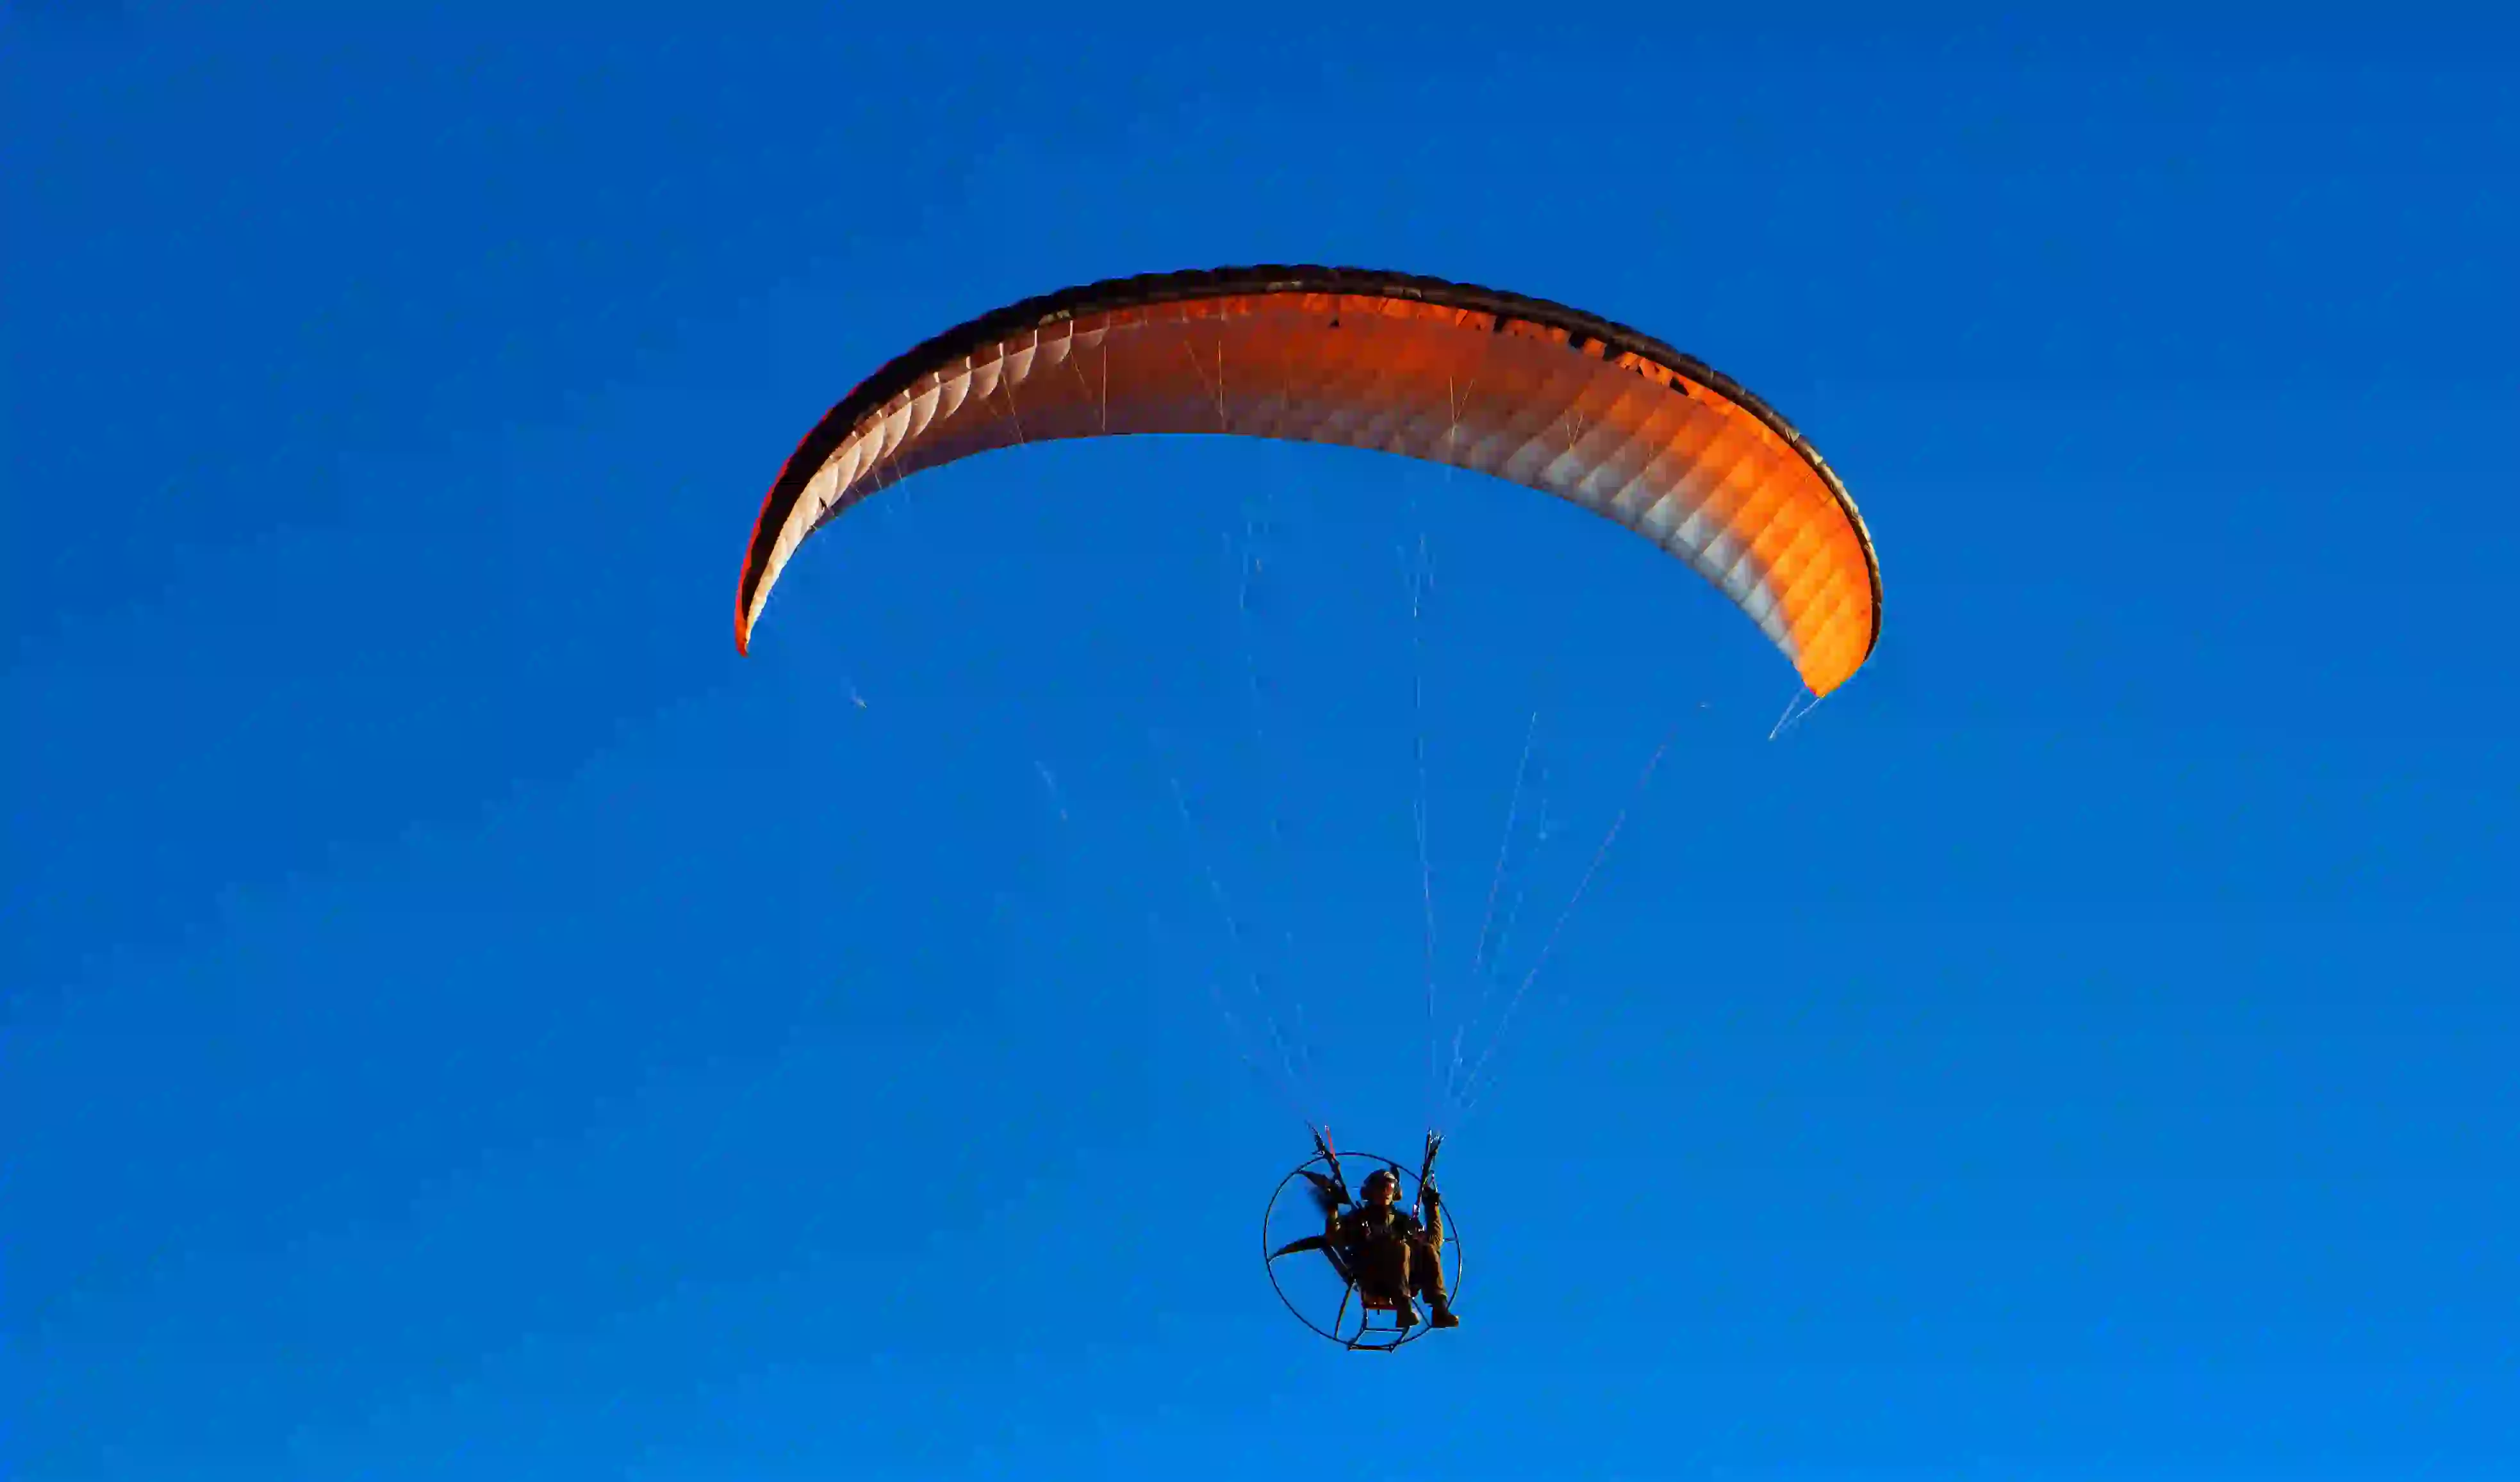 Camping with Paragliding in Nandi hills Bangalore